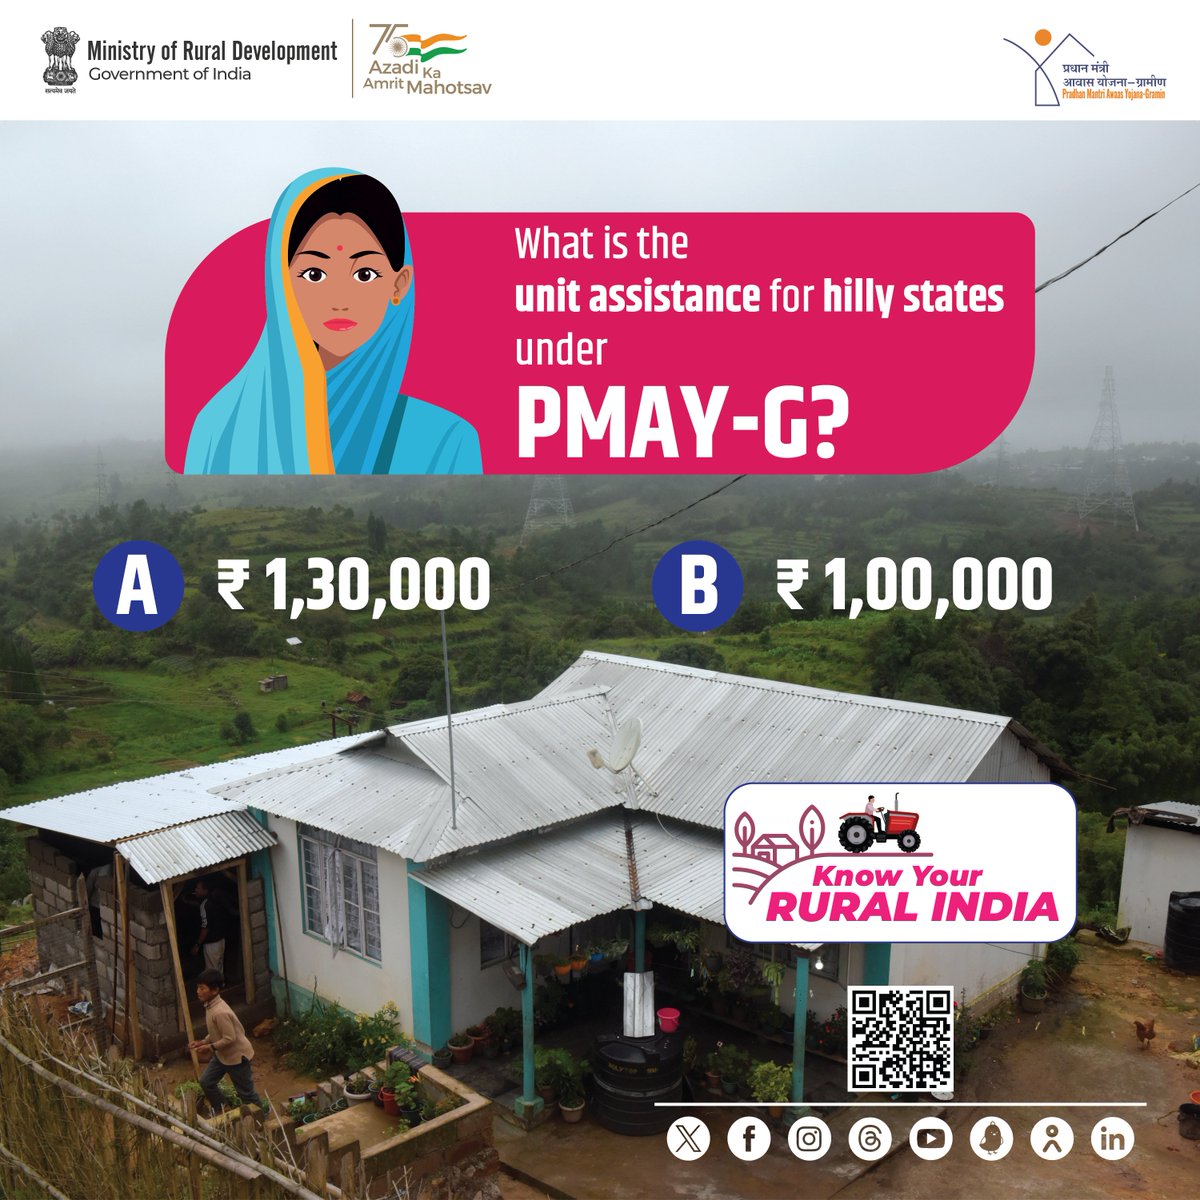 #KnowYourRuralIndia | #PMAYG provides pucca houses to all rural homeless and those households living in kutcha and dilapidated houses.

Do you know what is the unit assistance given to the beneficiaries of hilly states under #PMAYG?

Comment your answer below!

#MoRD #Contest